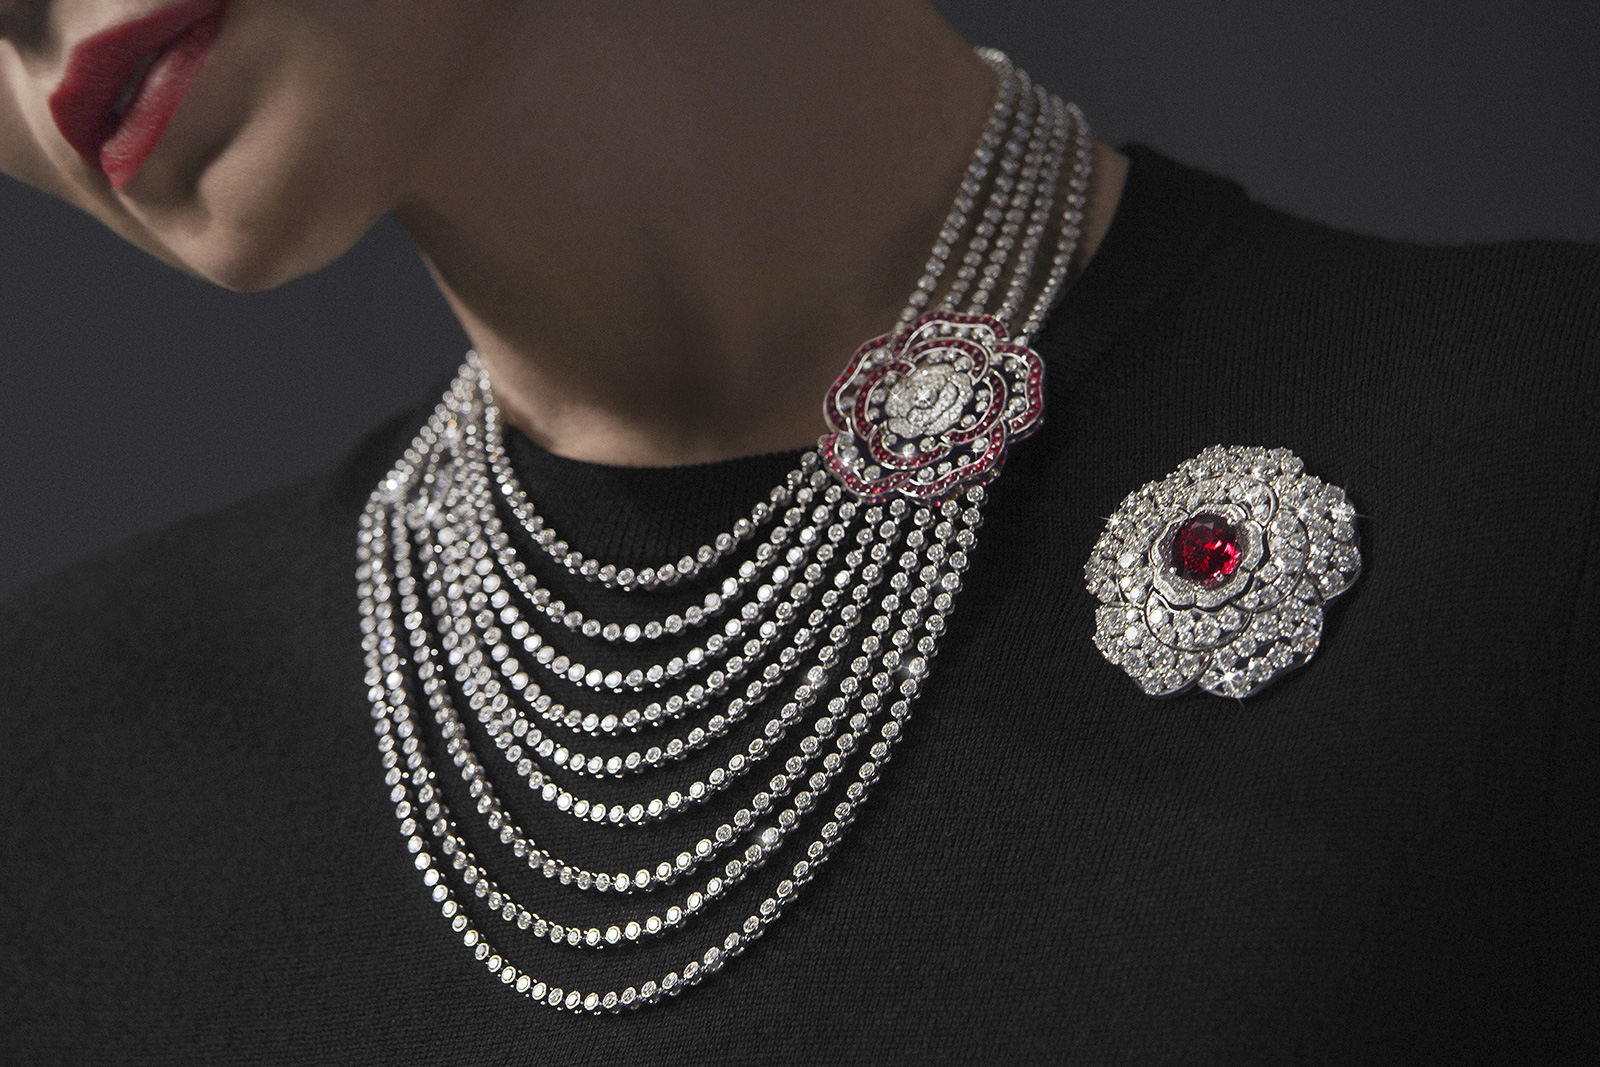 Chanel '1.5. 1 CAMÉLIA . 5 ALLURES' collection 'Rouge Incandescent' transformable necklace, in white gold, rubies and diamonds. Detachable camellia motif that may be worn as a brooch, and reveals another openwork camellia motif